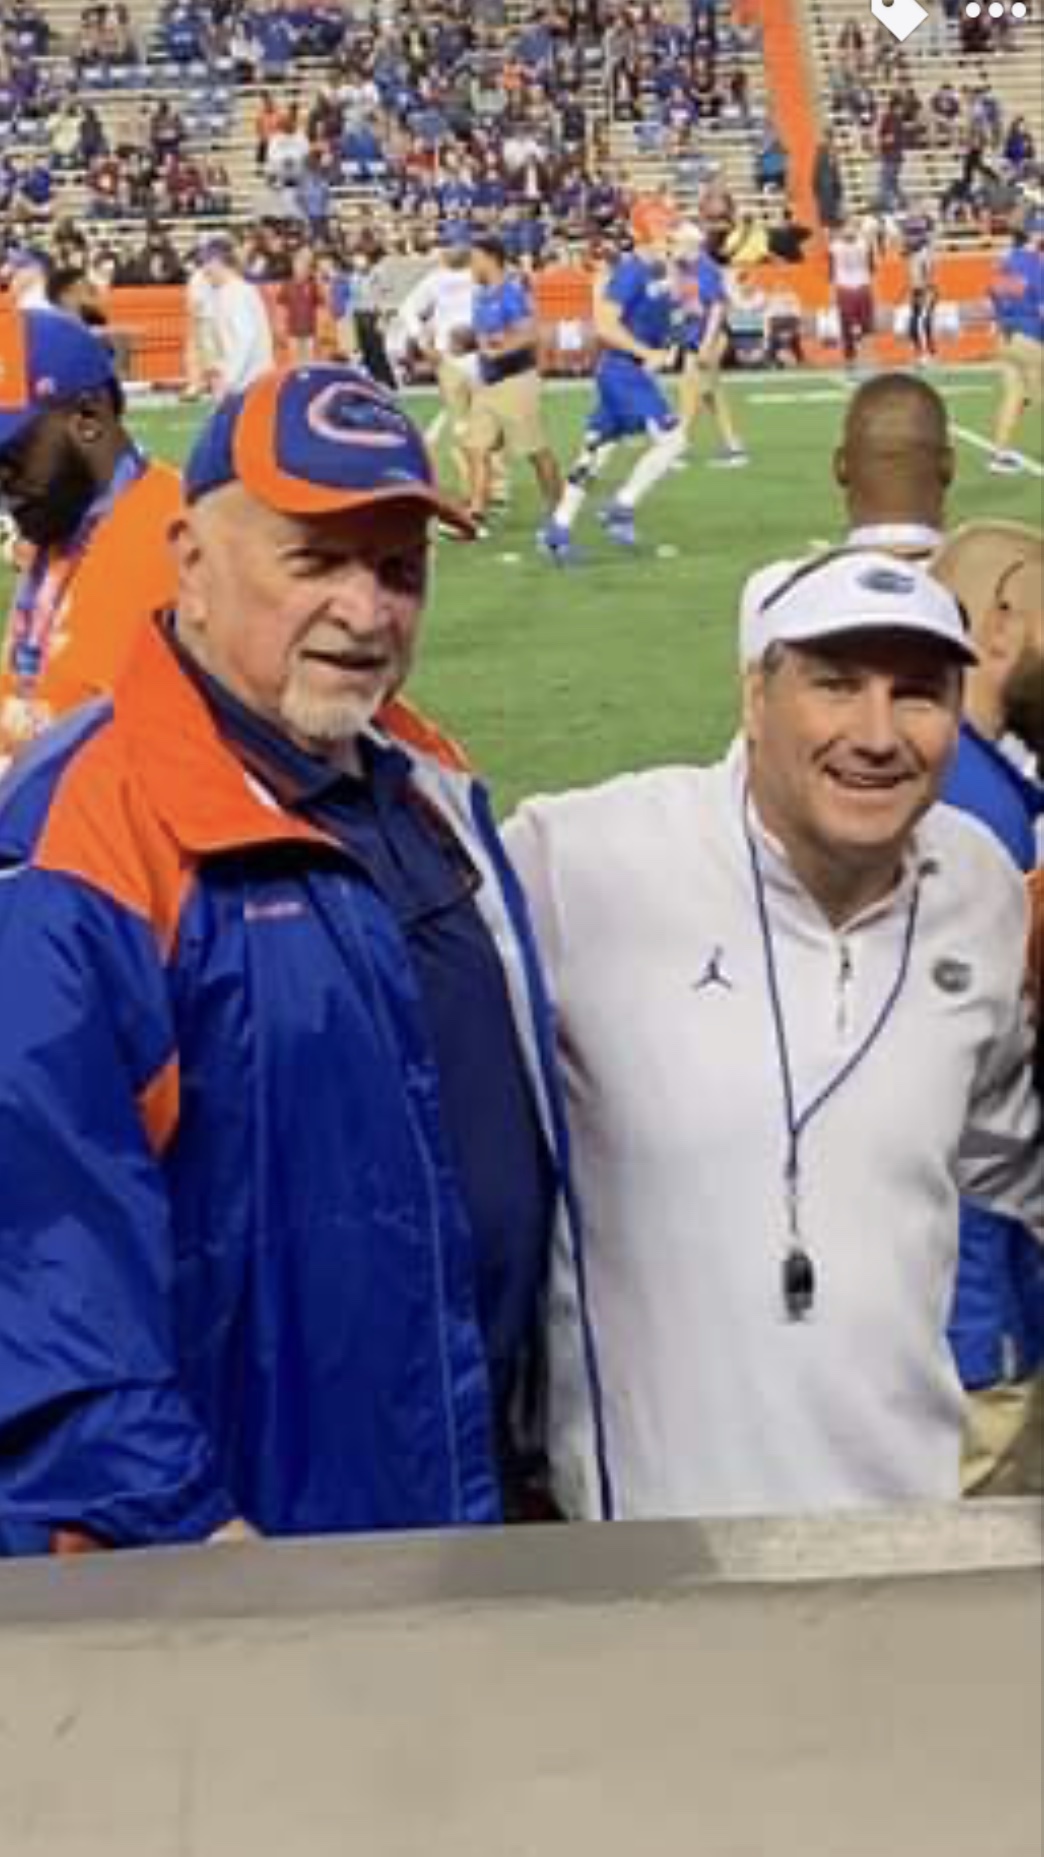 Coach Vel Heckman and Gator Head Coach Dan Mullen met up on Florida Field before the Nov. 30 game.